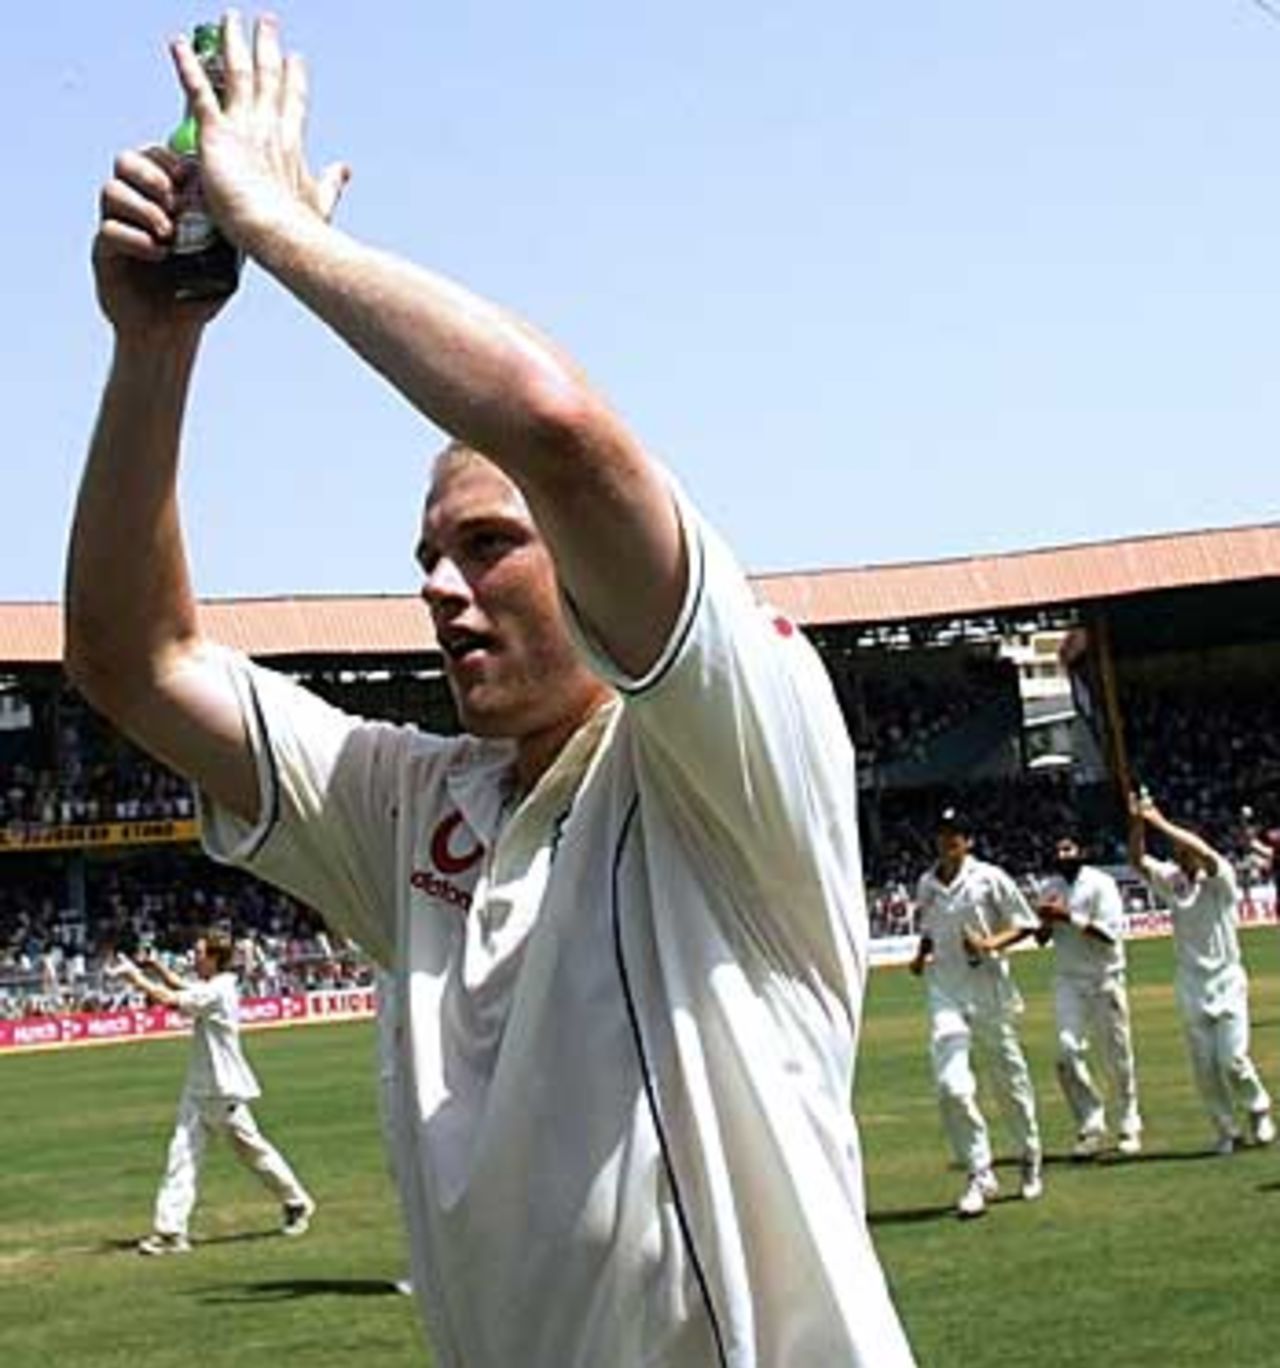 Leading by example: the England captain Andrew Flintoff applauds his team, India v England, 3rd Test, Mumbai, March 22, 2006